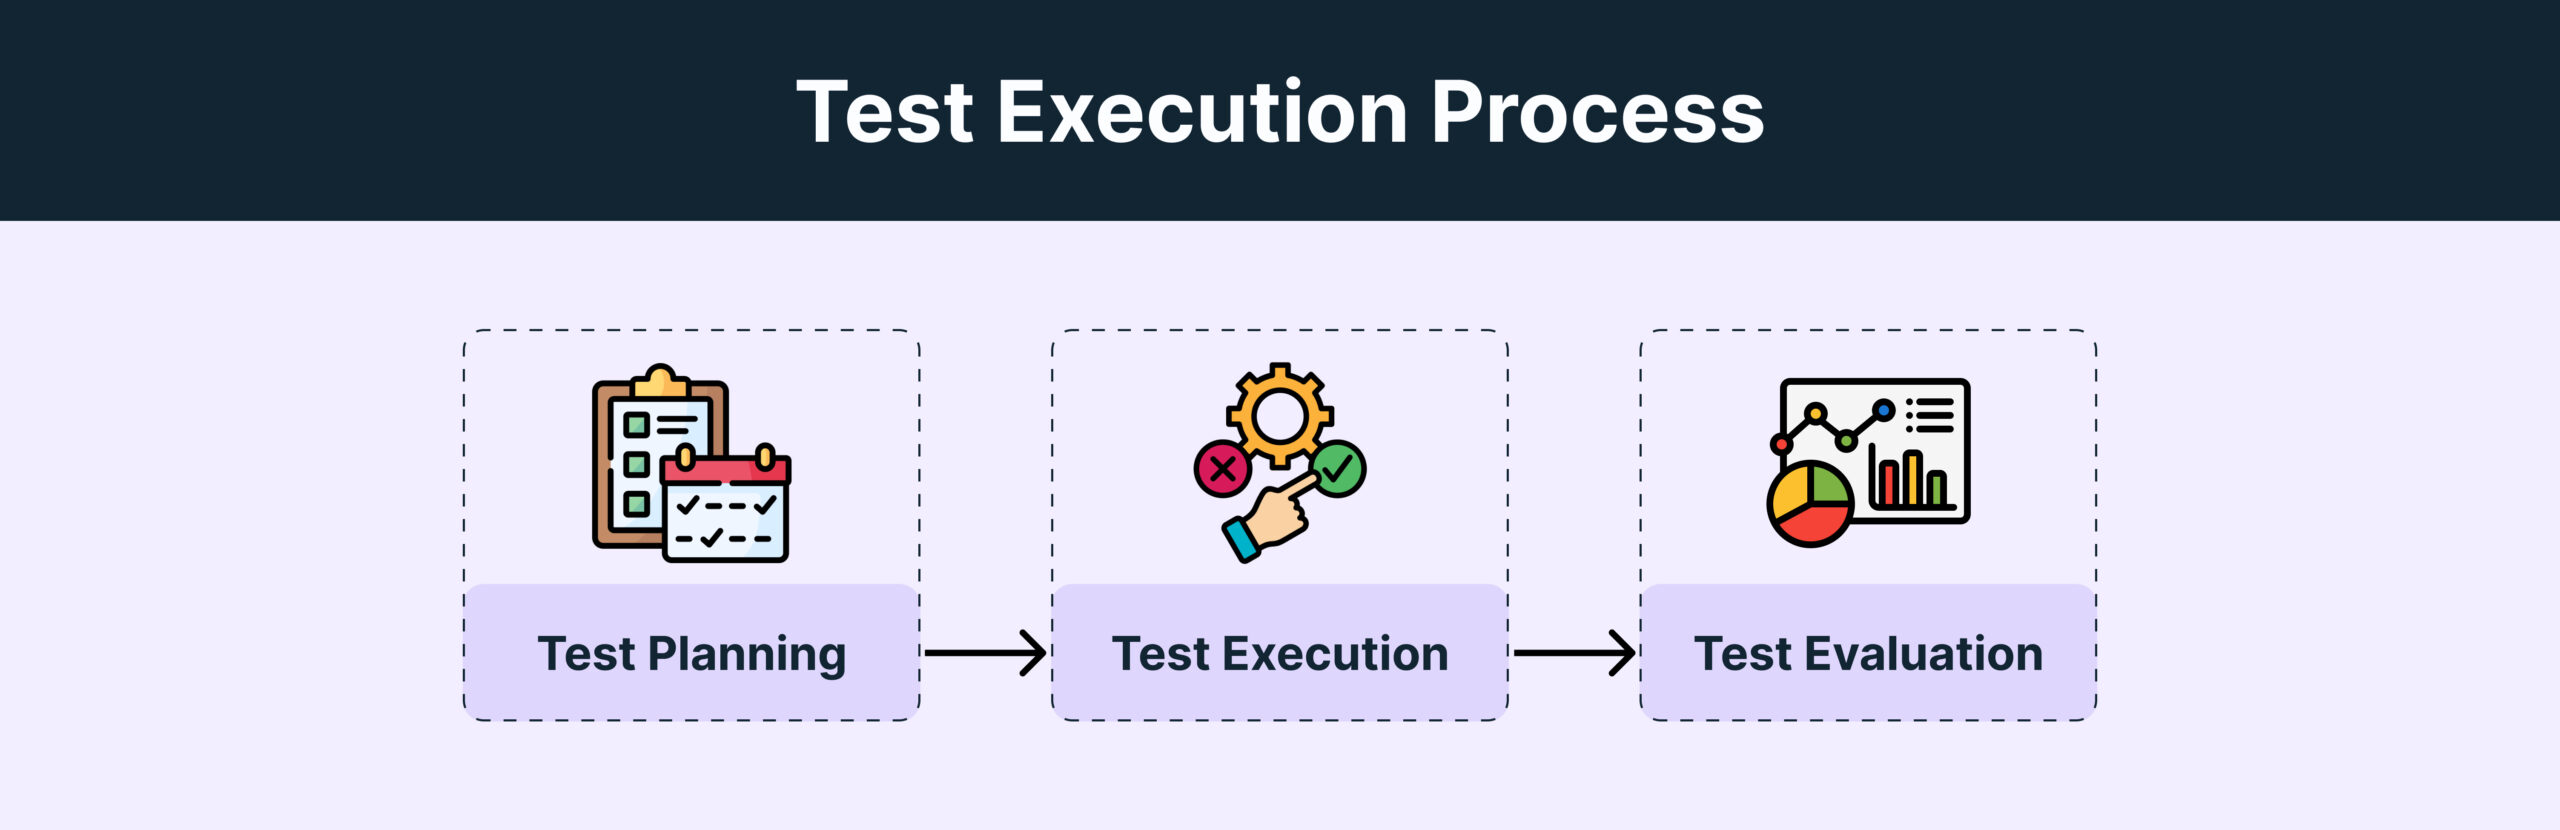 Test Execution Stages